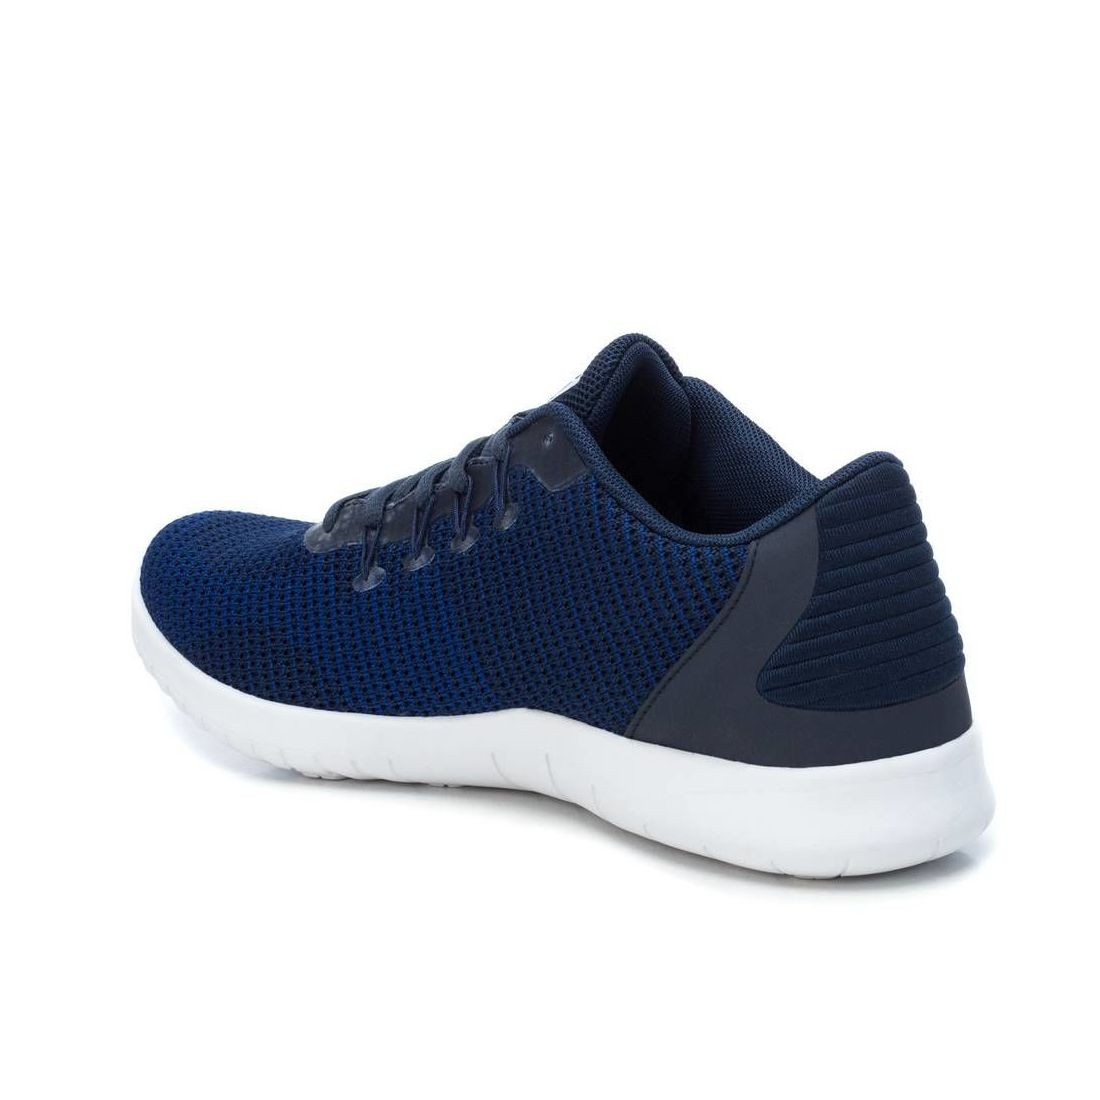 Men's Xti lace up shoes in blue light fabric